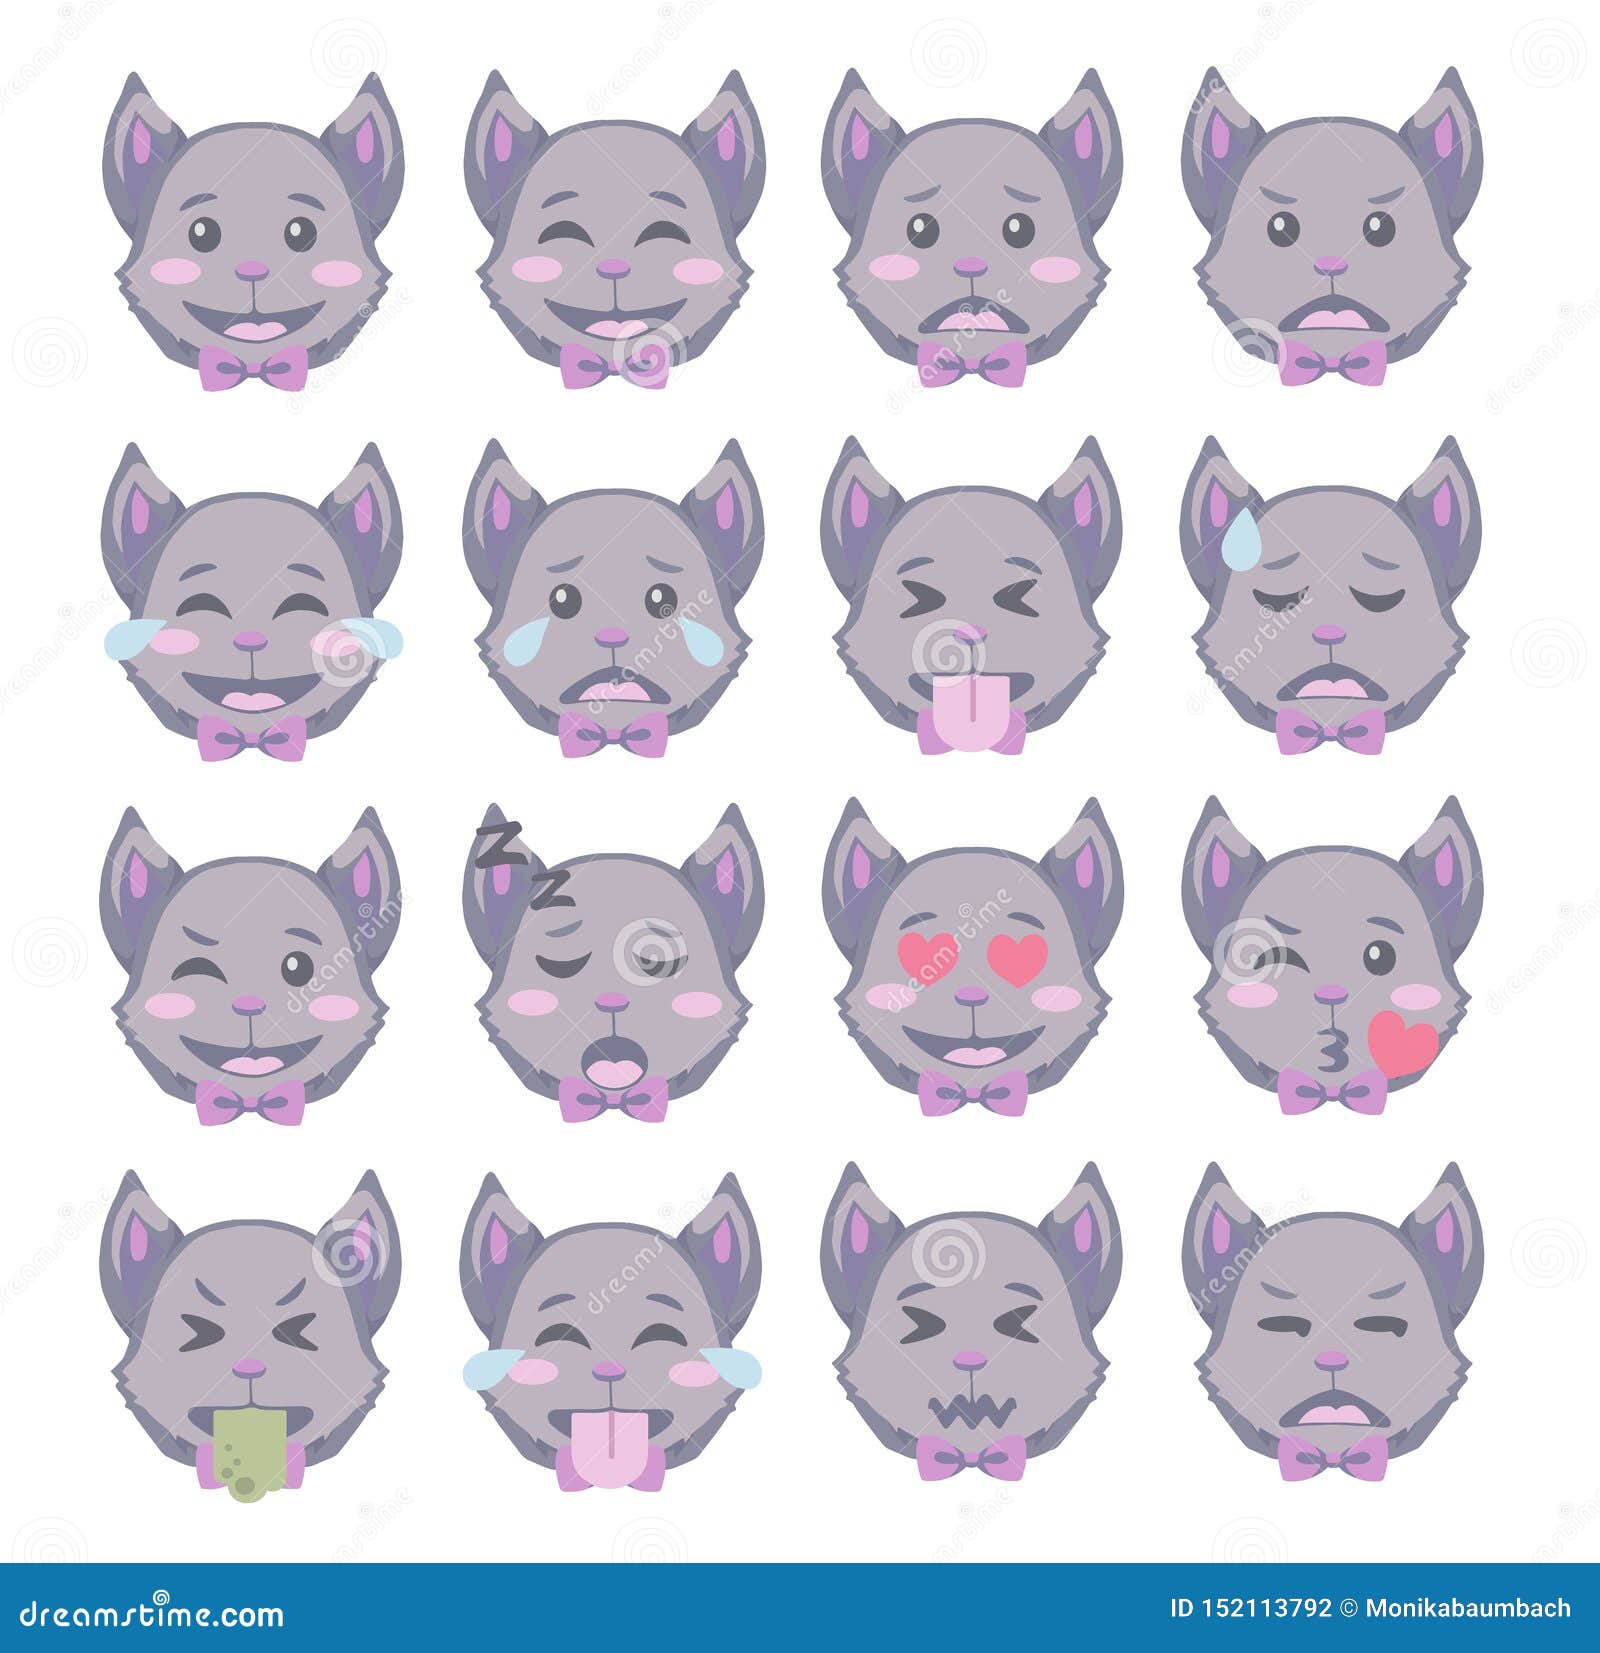 Cute Cartoon Style Halloween Bat Faces with Different Expression Emoticon  Icon Vectors Set Stock Vector - Illustration of cartoon, icons: 152113792